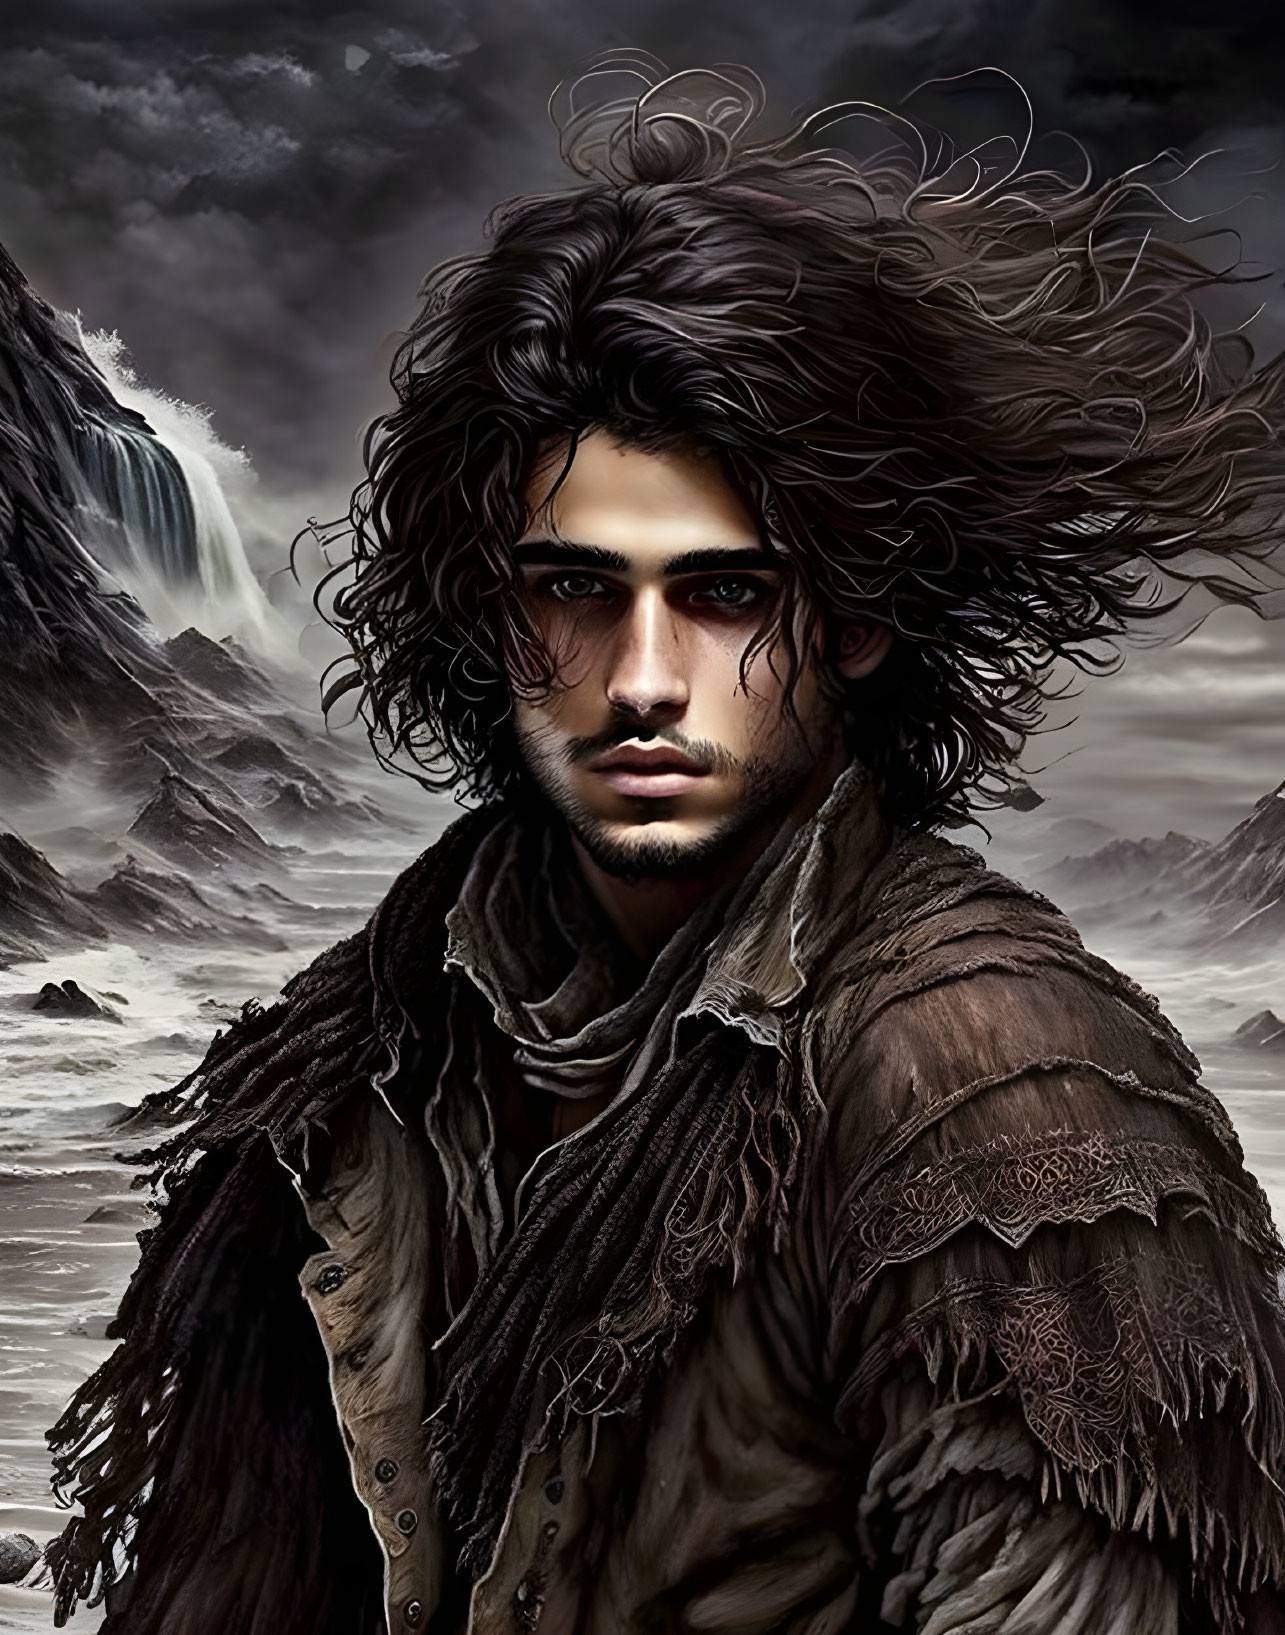 Digital painting of man with wild curly hair, intense eyes, rugged clothes, mountains, waterfall.